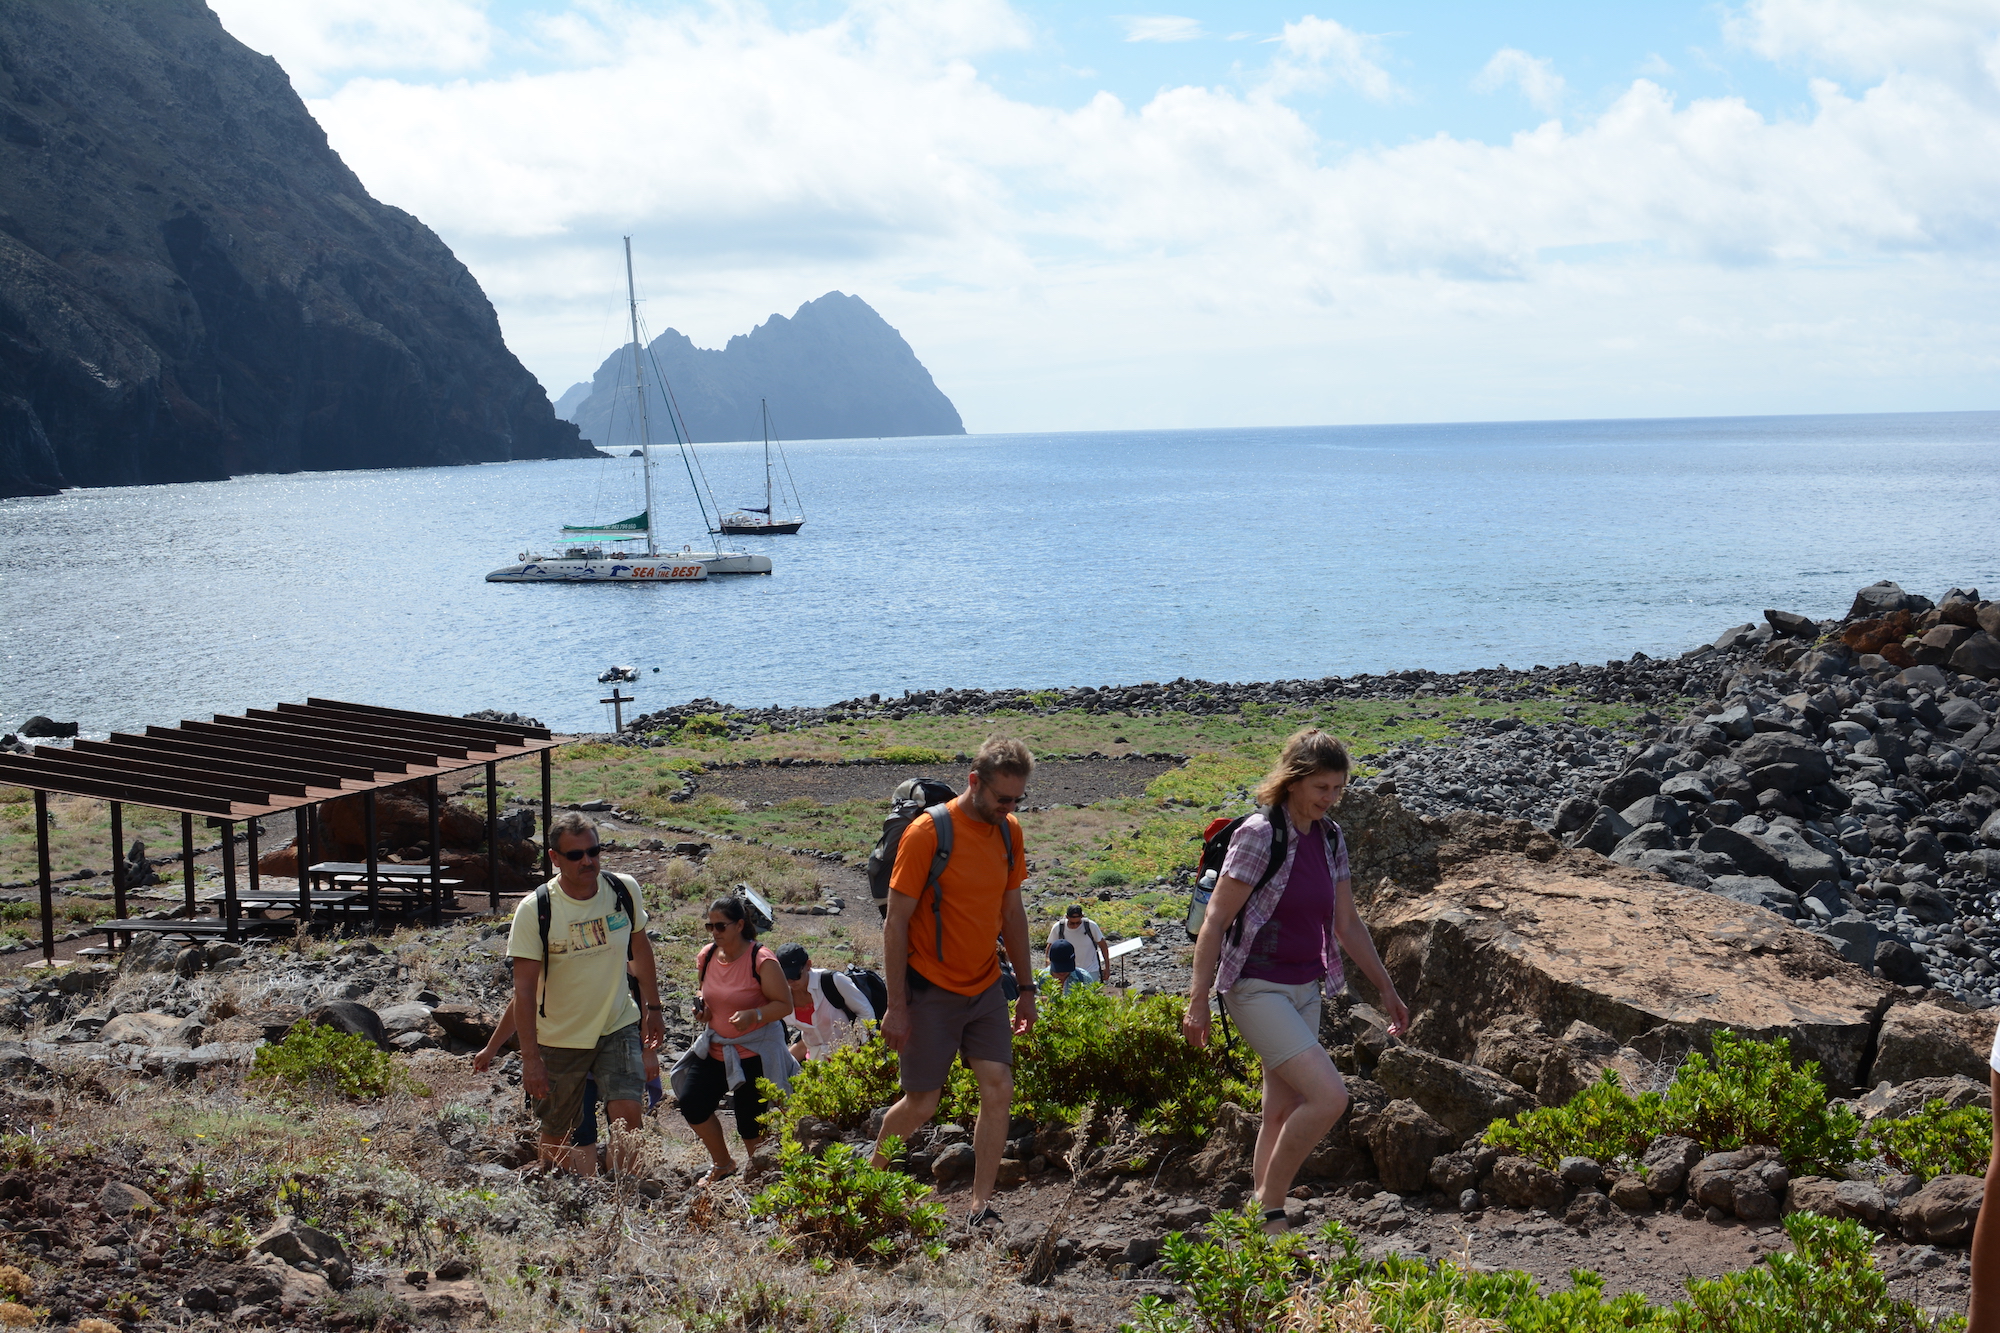 Discover desertas islands by foot